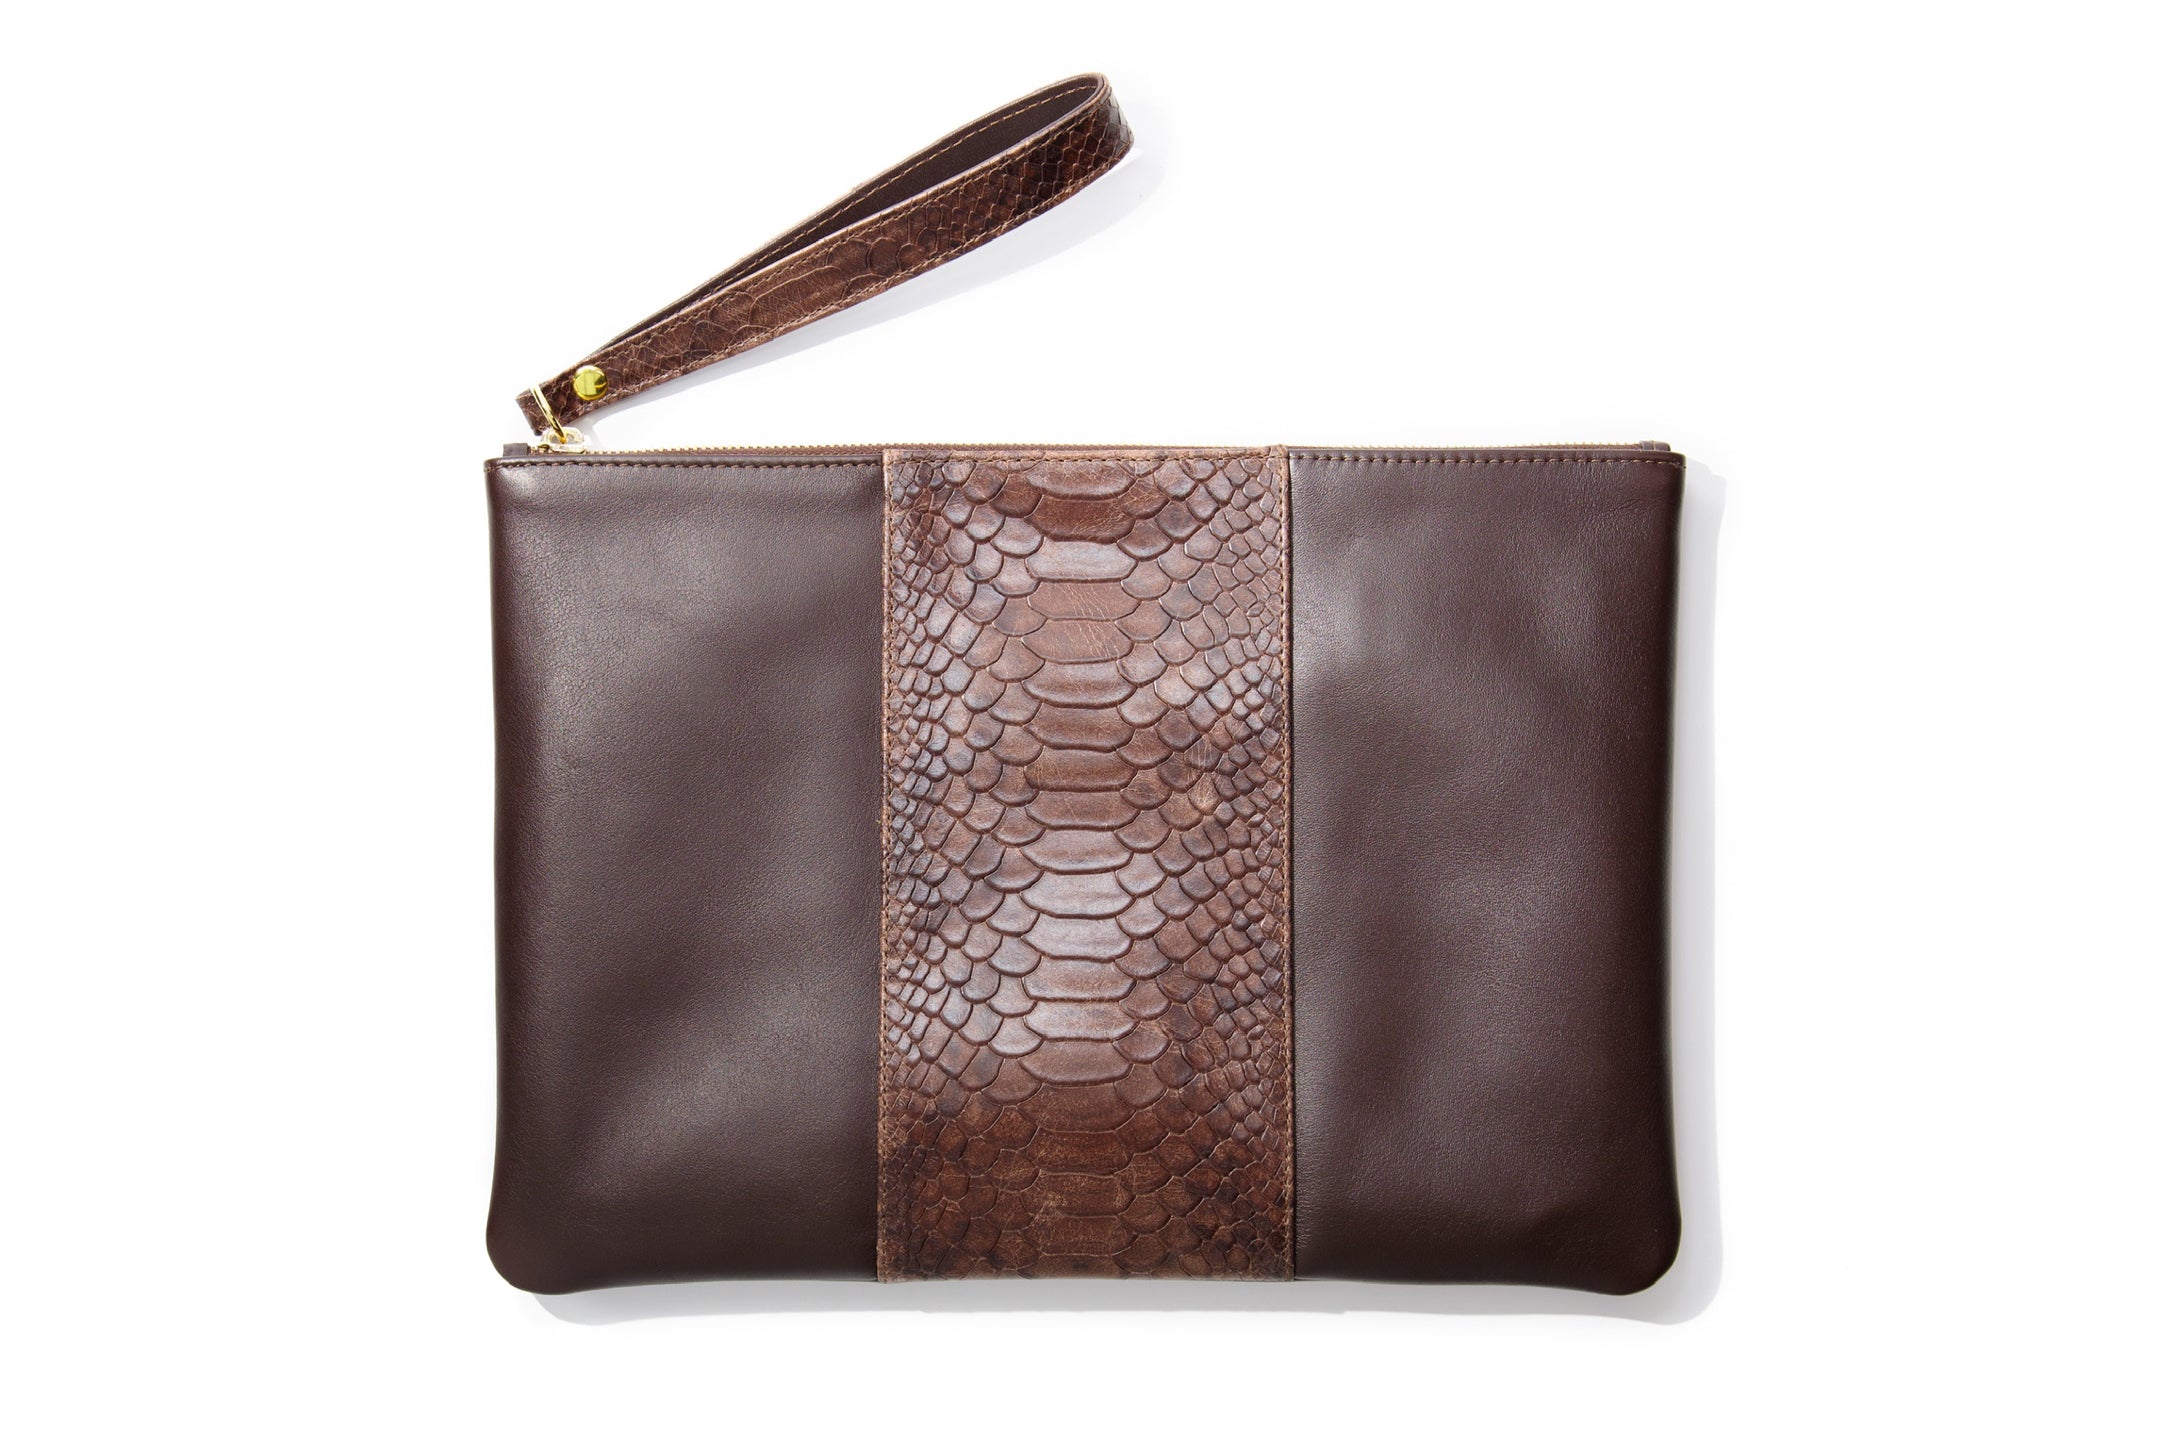 The Clutch - Brown - Bags by Urbbana